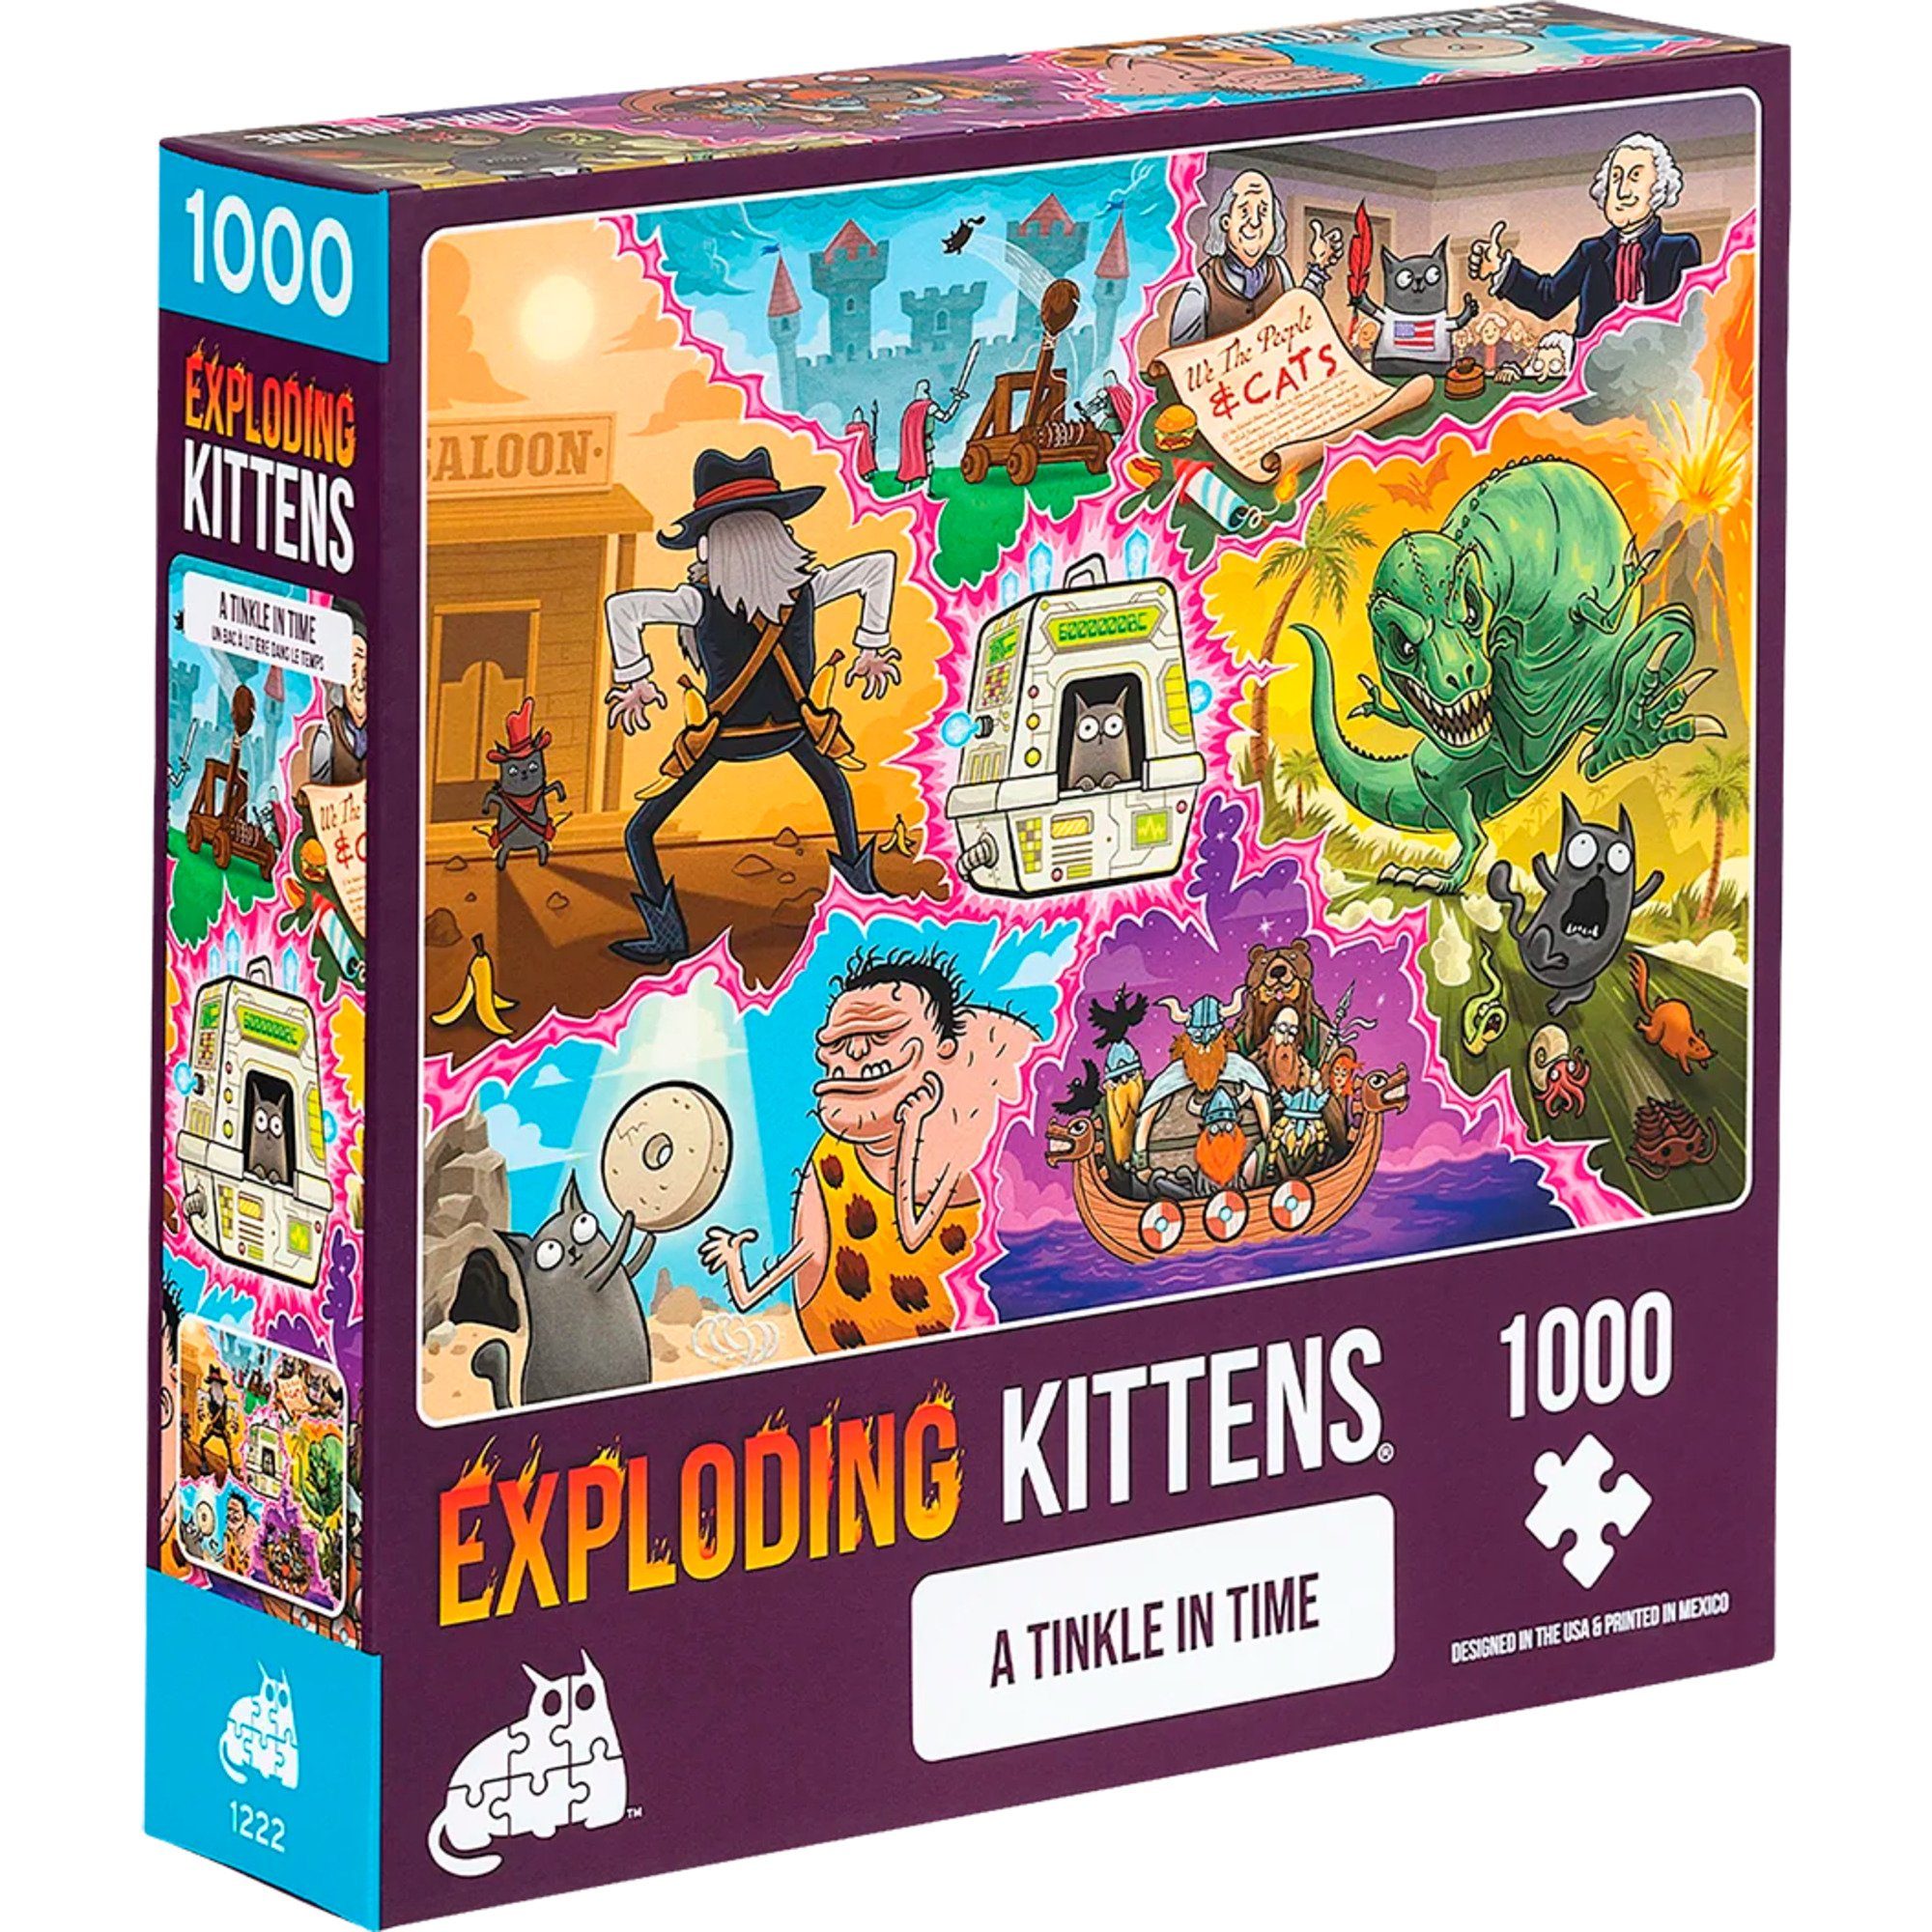 Asmodee Puzzle Asmodee Puzzle Exploding Kittens - A Tinkle in, Puzzleteile